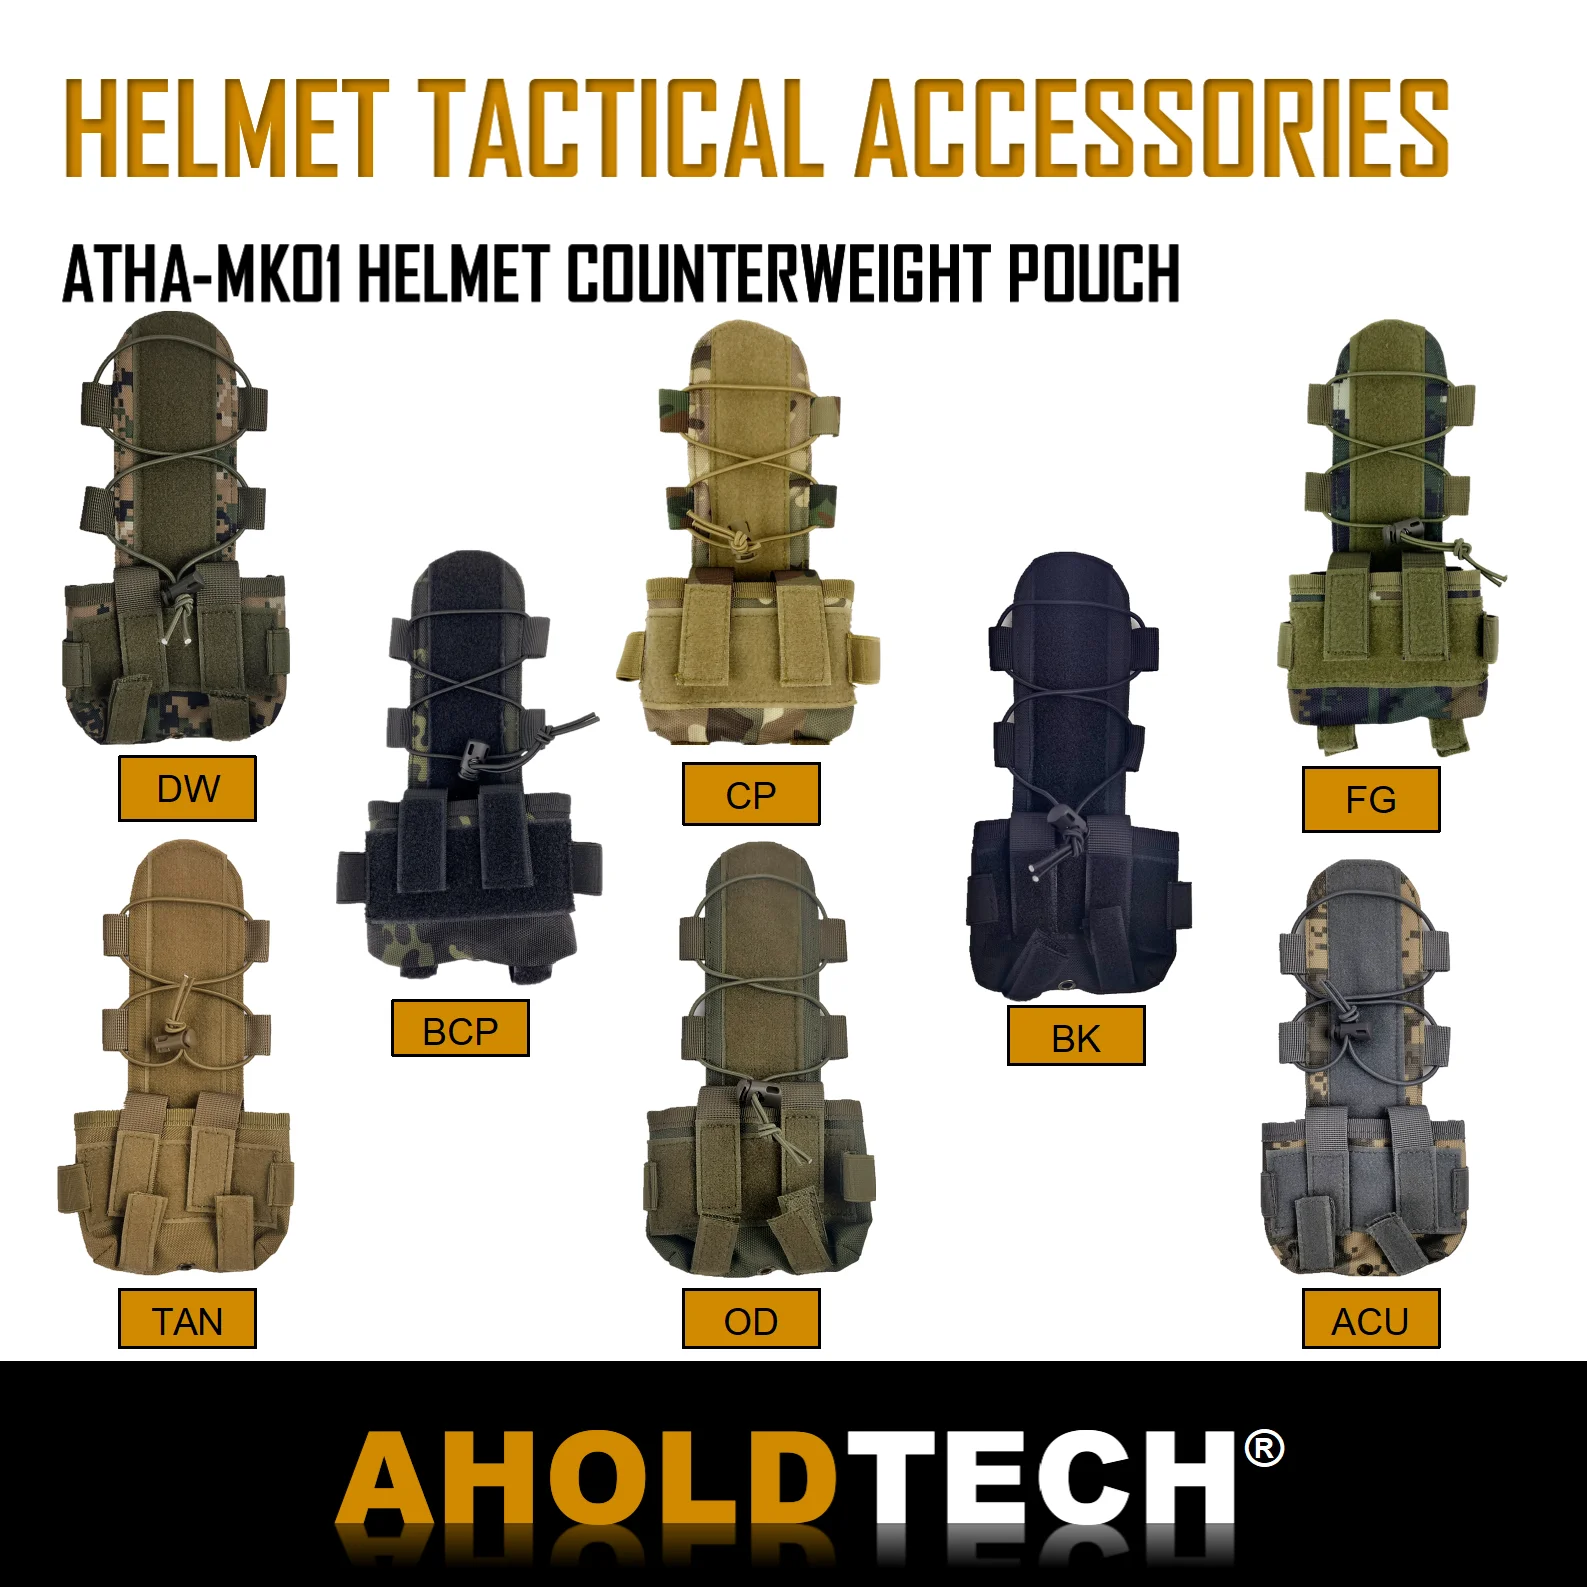 

Aholdtech Battery Pouch Case Balance Weight Bag Bulletproof Helmet MK2 Counterweight Pack With Elastic Rope For Tactical Army